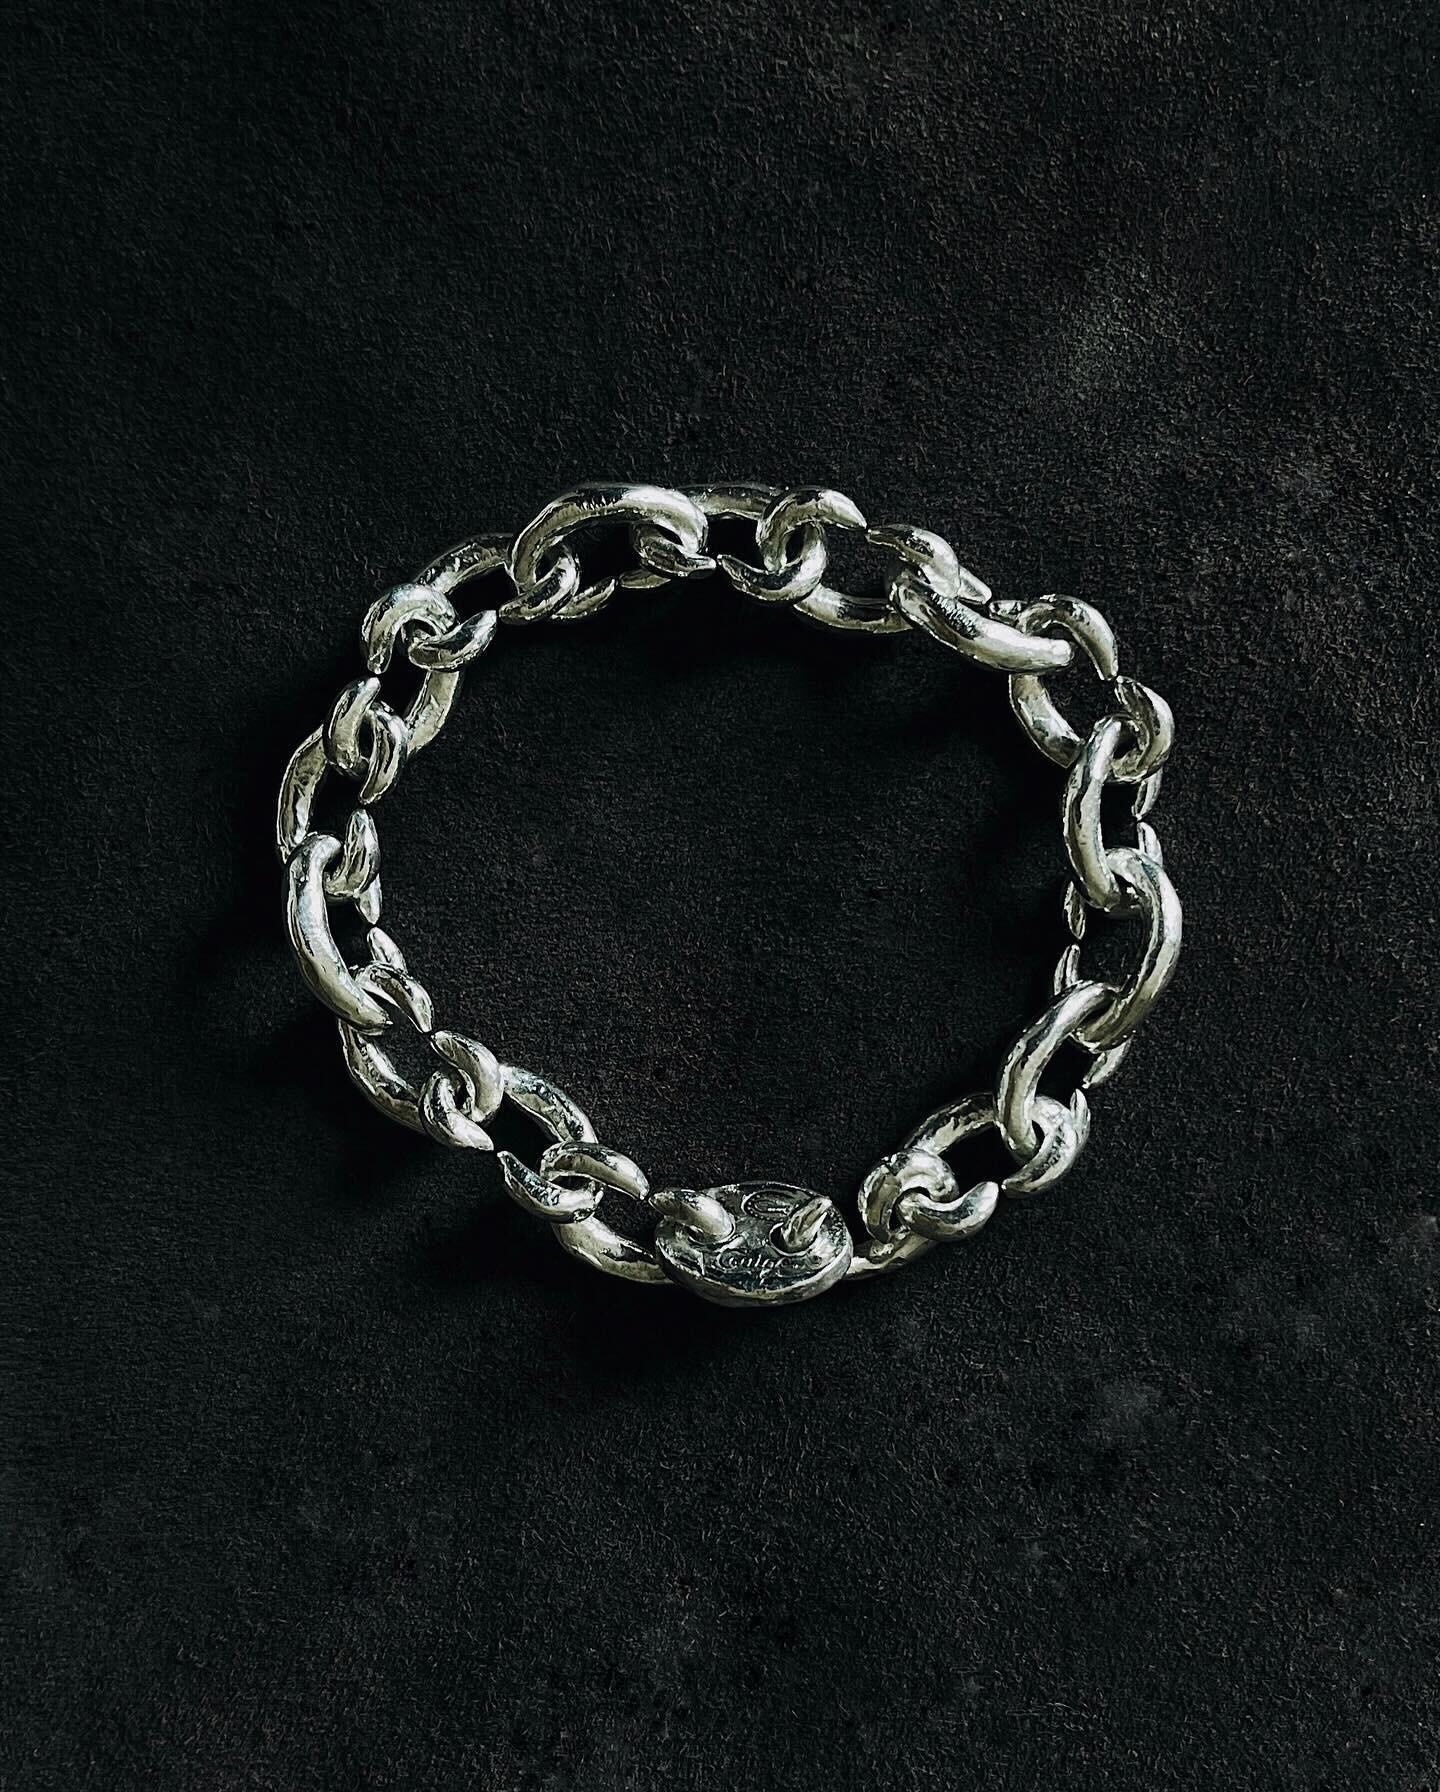 Prototype &ndash; Hand-formed hook chain bracelet, in Sterling Silver. Made to order.